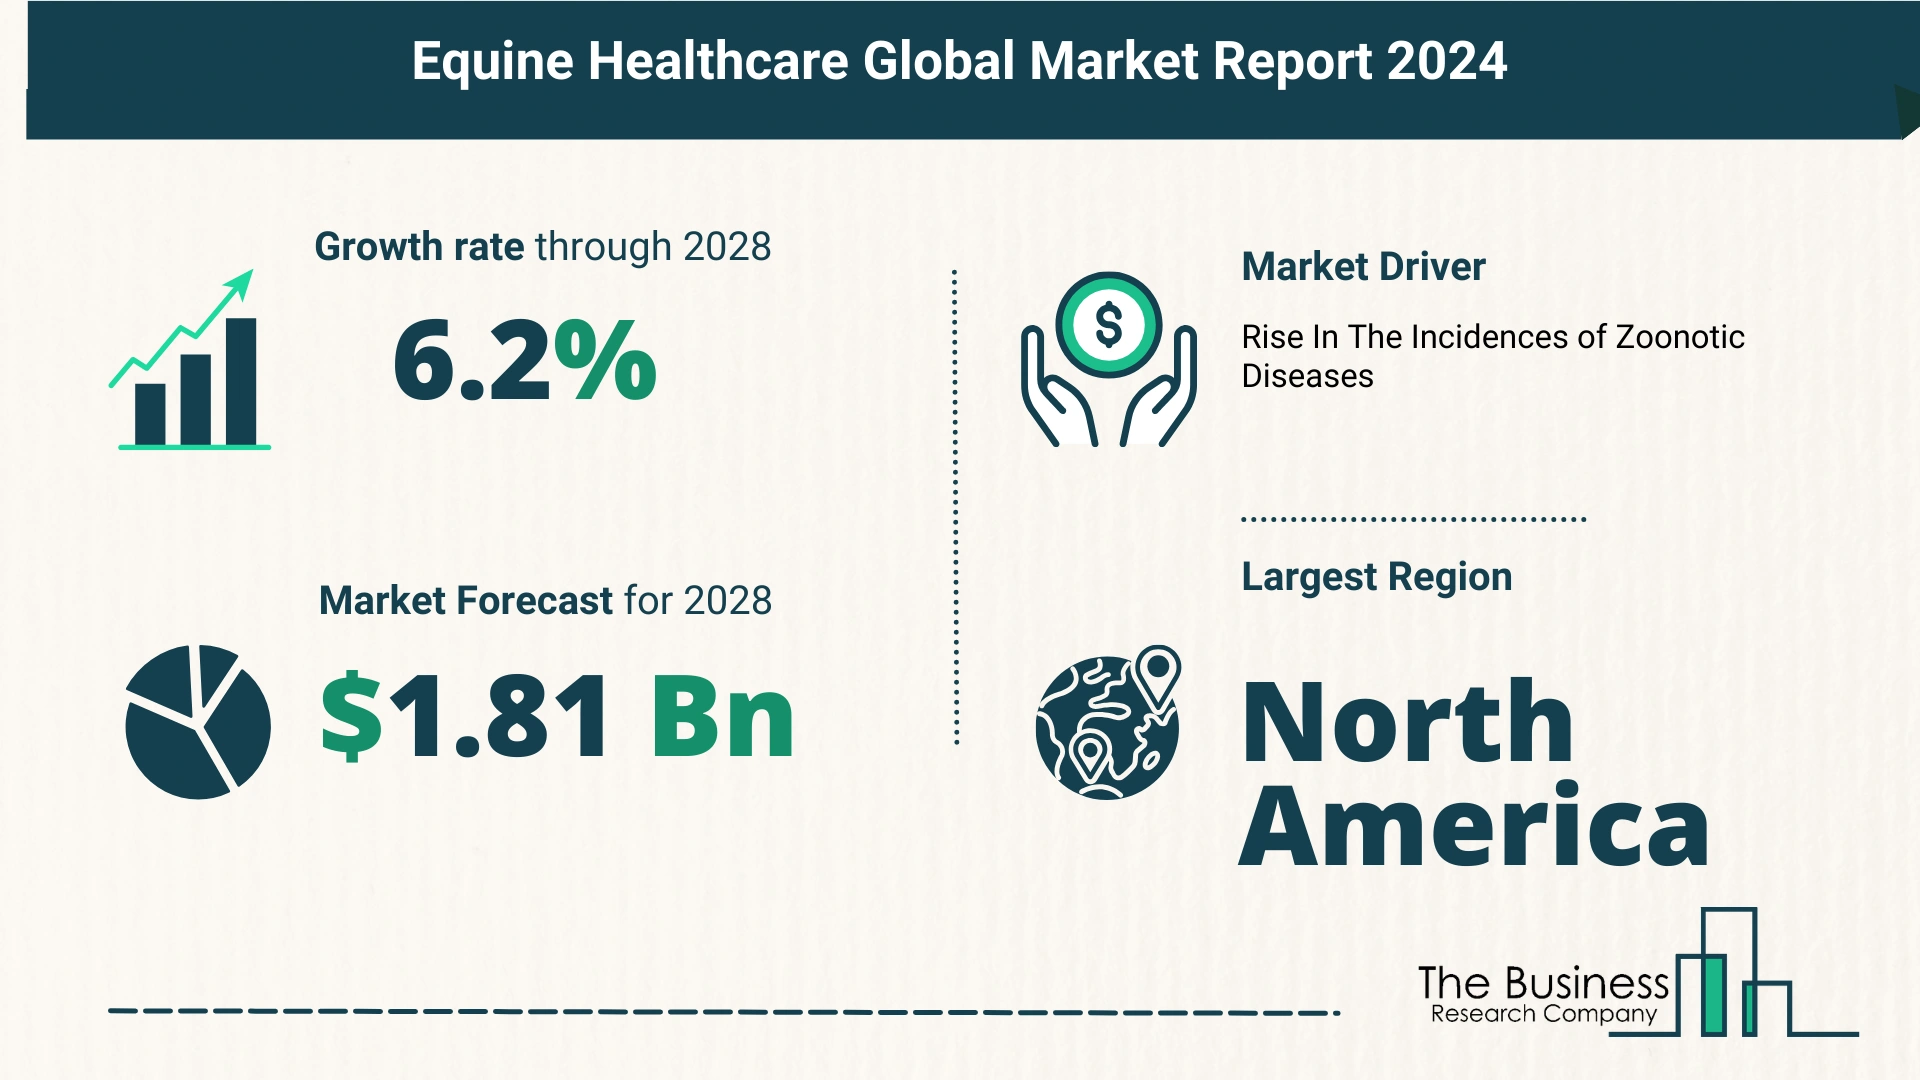 Key Trends And Drivers In The Equine Healthcare Market 2024